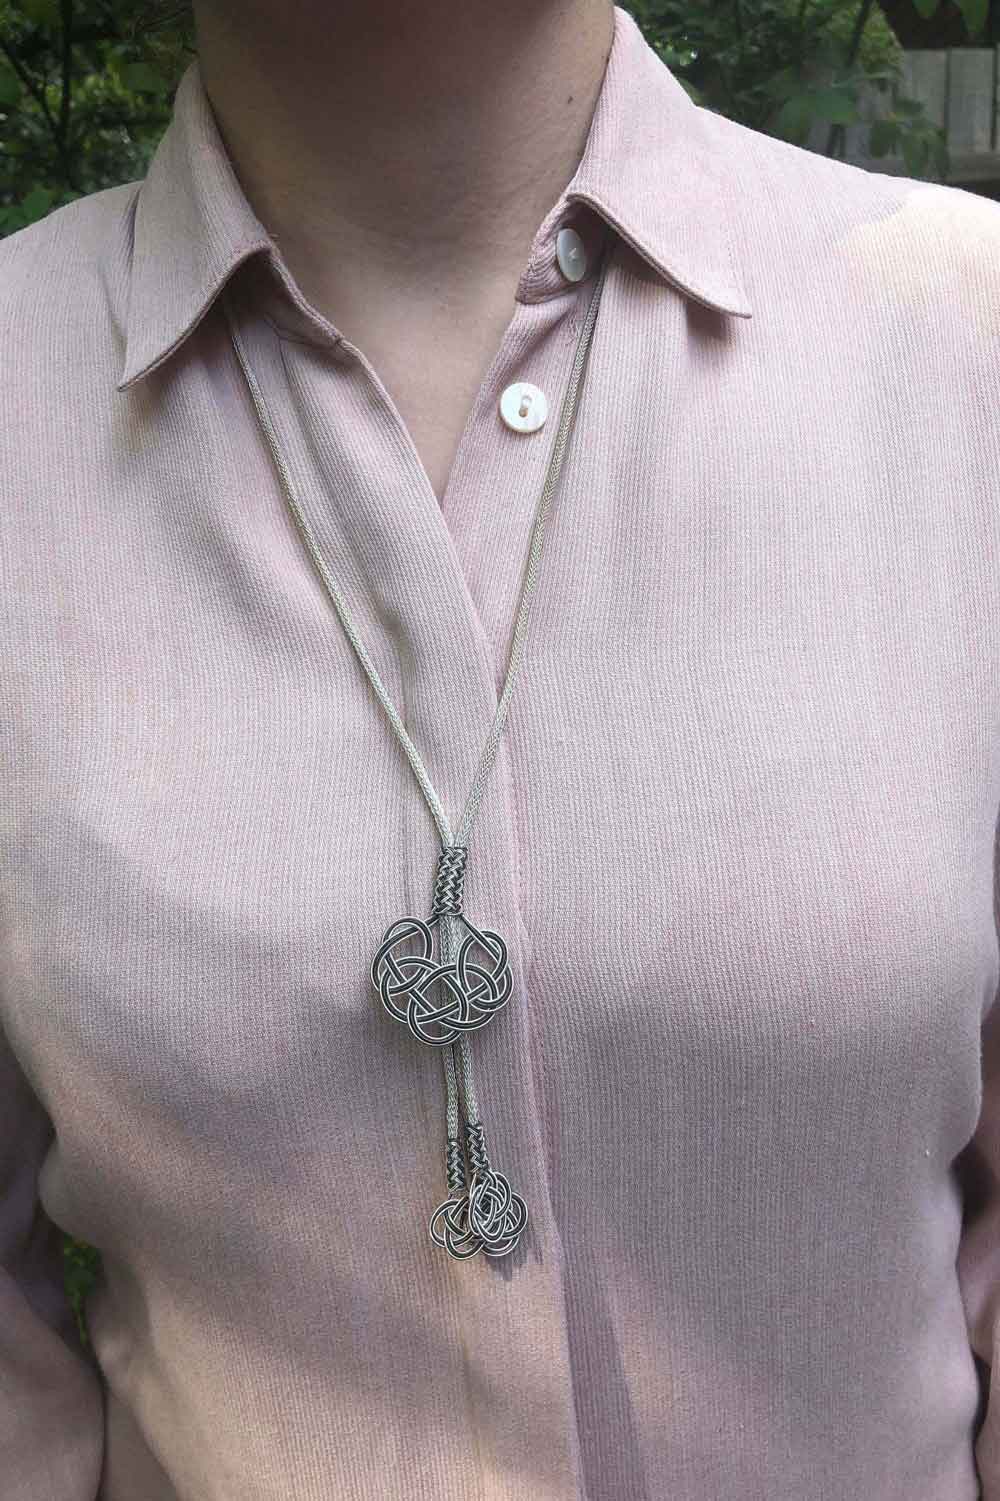 Sterling Silver Woman, Macrame Silver Necklace, Unique Necklace, Boho Necklace, Handmade Necklace, Best Jewelry for Women